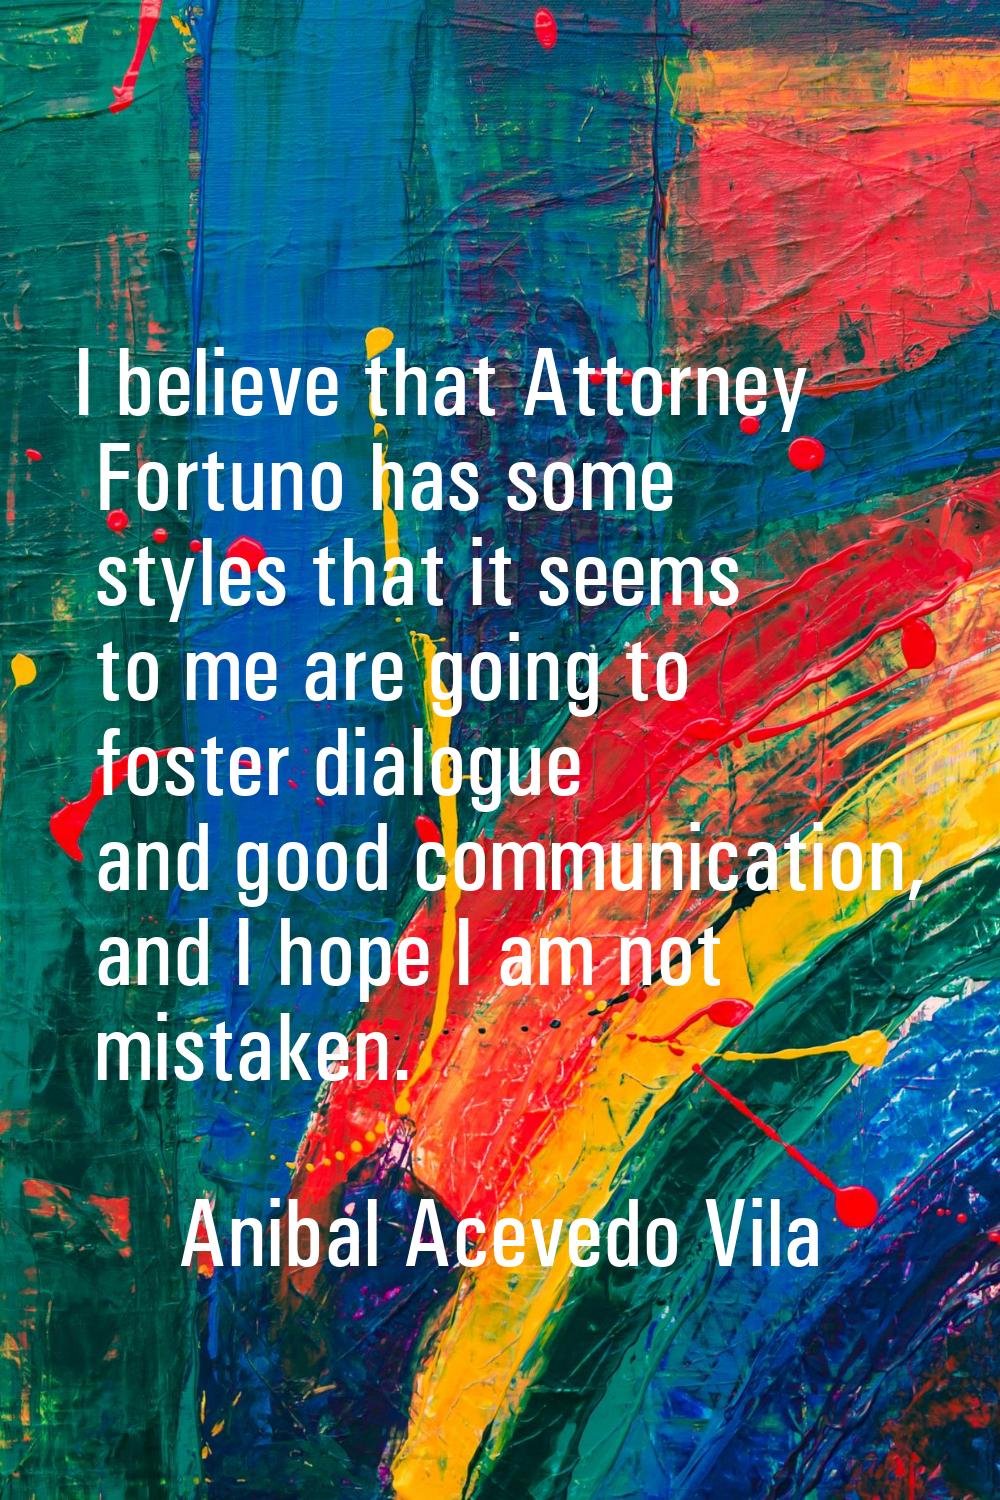 I believe that Attorney Fortuno has some styles that it seems to me are going to foster dialogue an